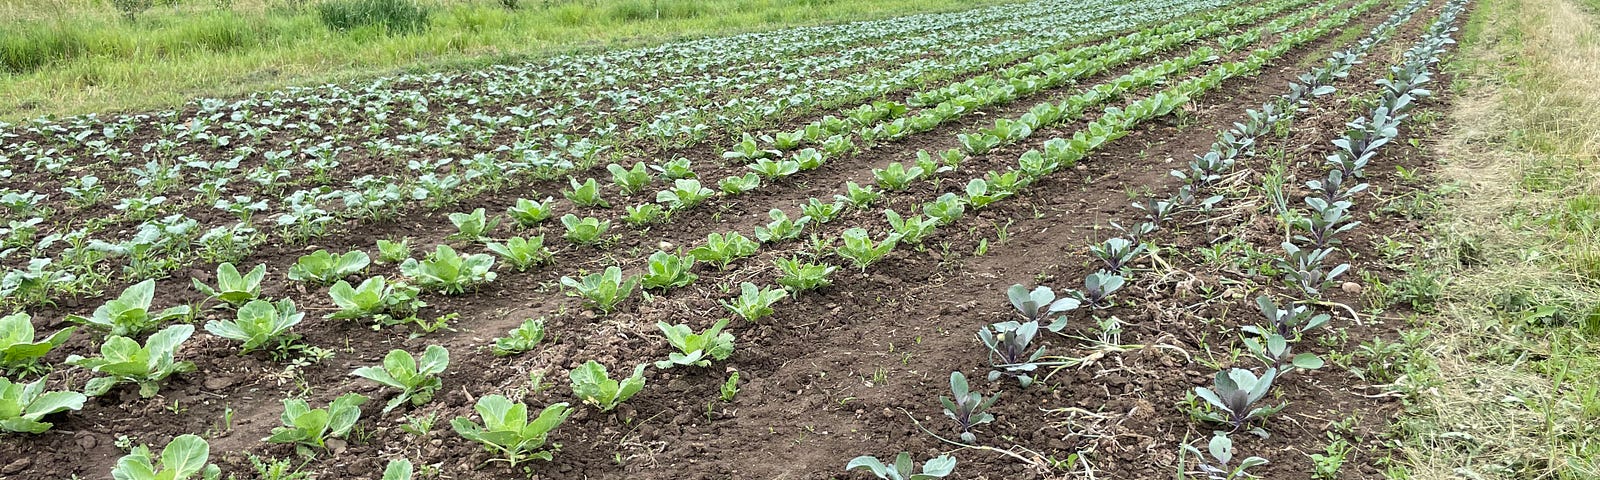 Rows of green vegetables growing in rich brown soil with trees in the far background.